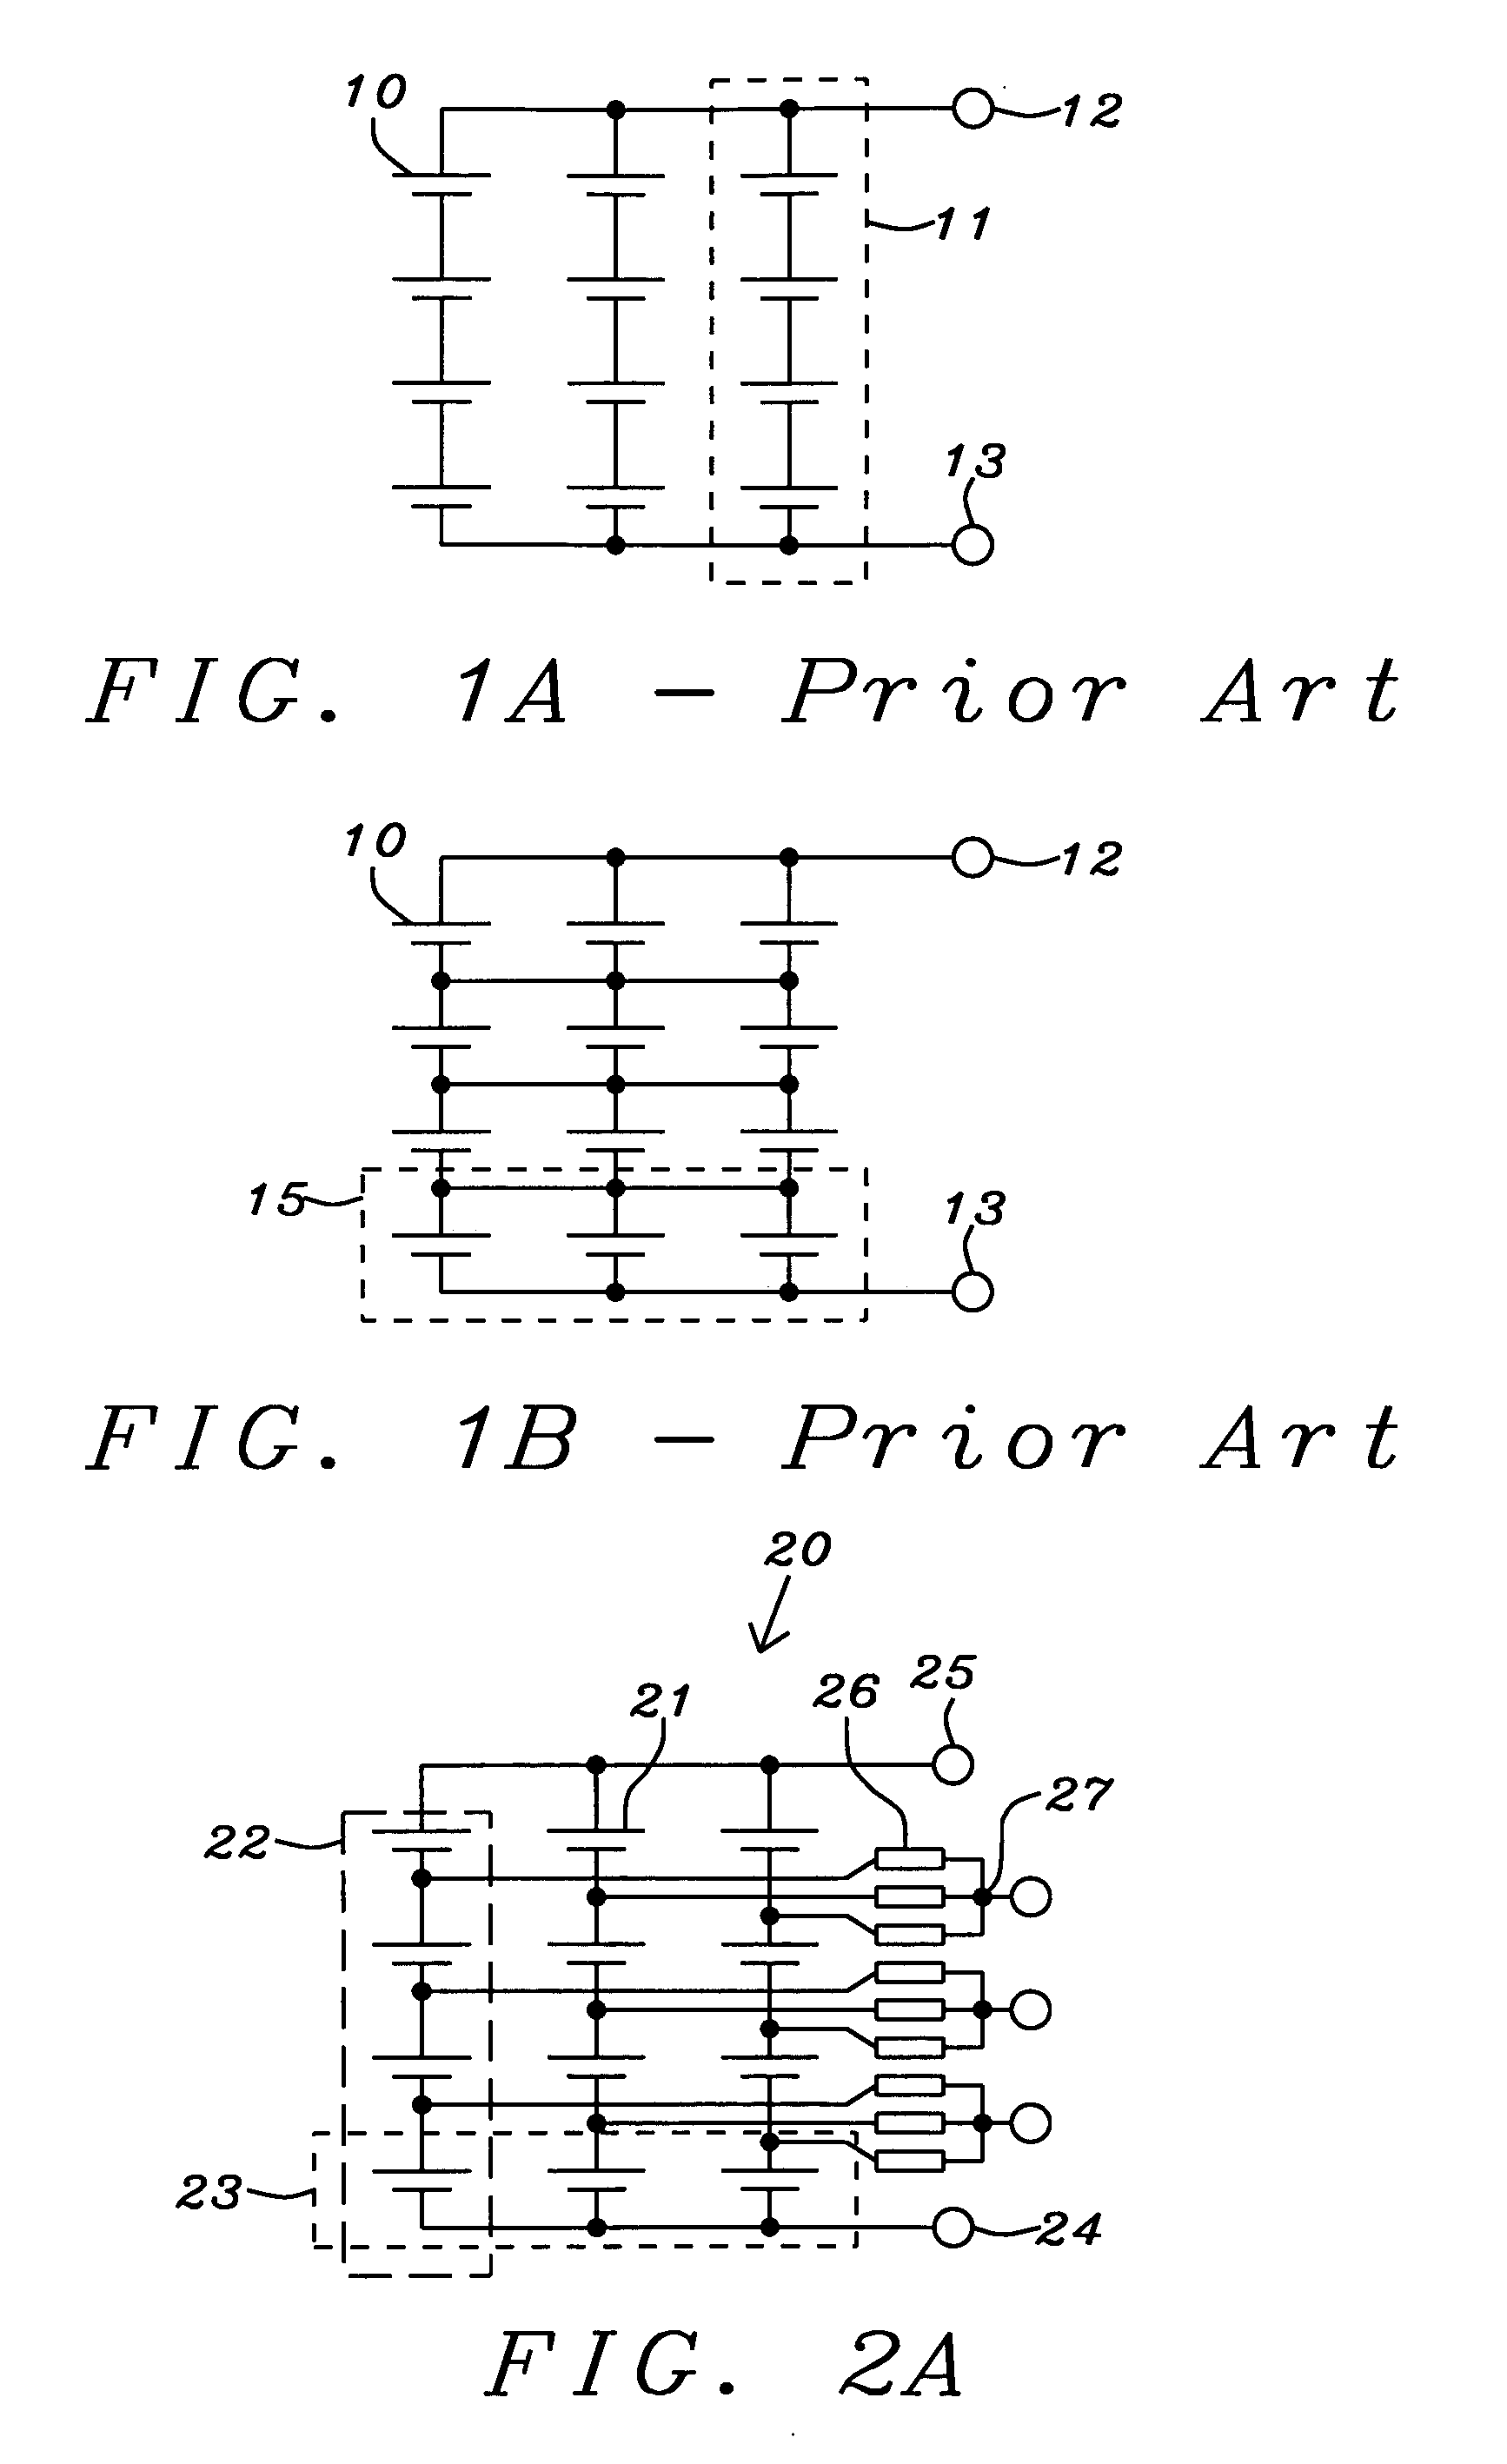 Connection scheme for multiple battery cells